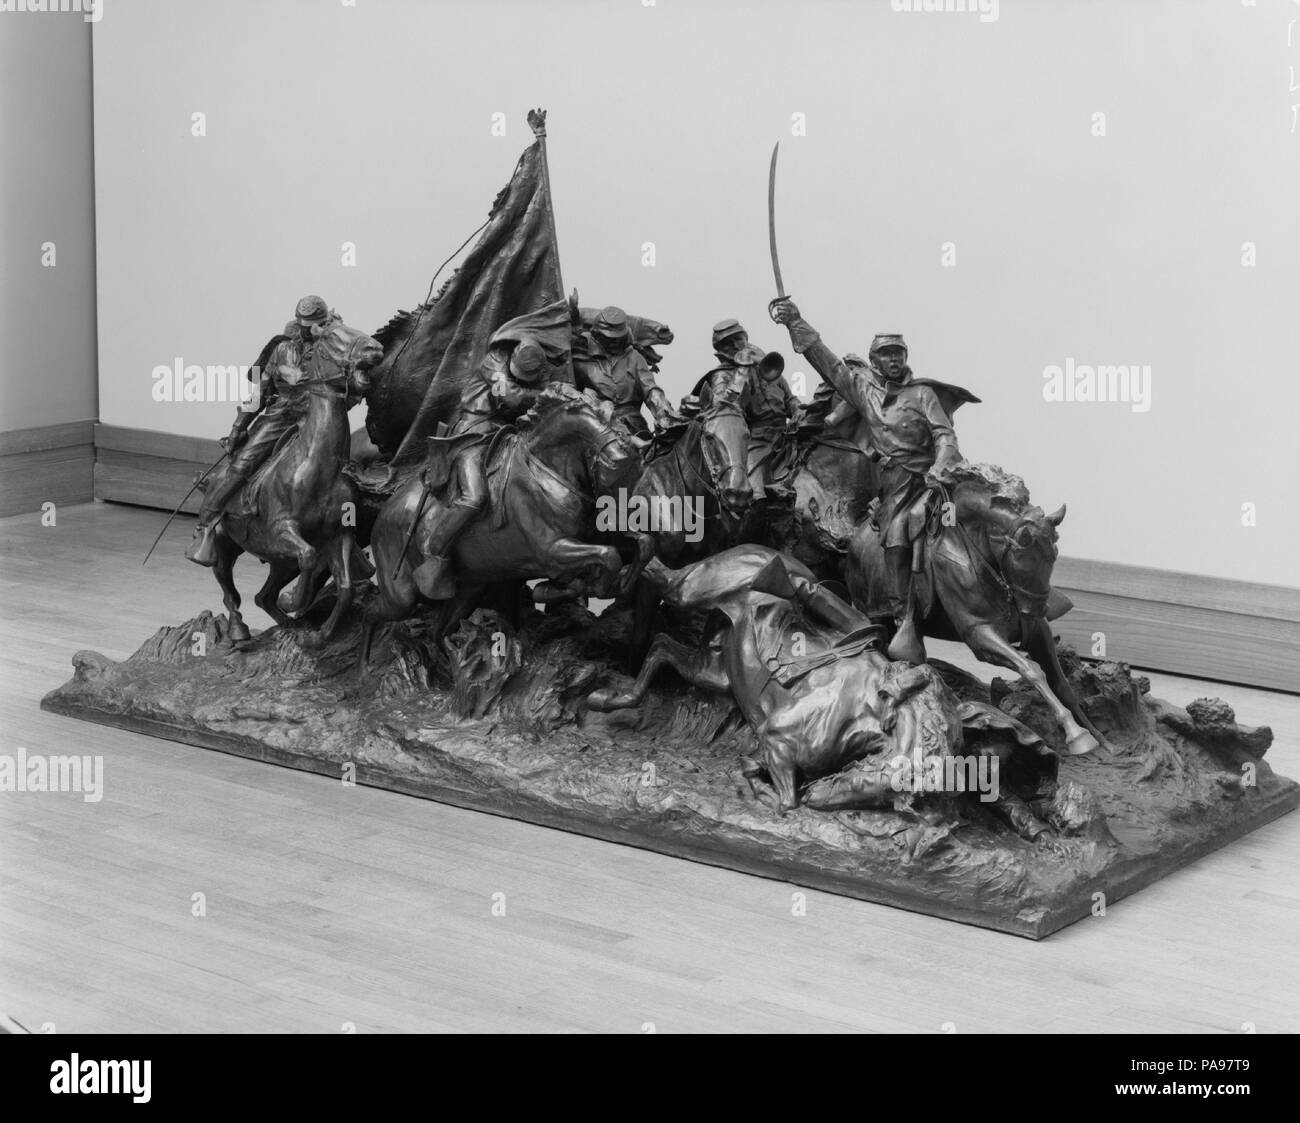 Cavalry Charge. Artist: Henry Merwin Shrady (American, New York 1871-1922 New York). Dimensions: 53 1/2 x 102 x 44 in. (135.9 x 259.1 x 111.8 cm). Date: 1902-16, cast 1924.  While still at work on 'George Washington at Valley Forge' (1974.9), Shrady entered a competition for a monument to General Ulysses S. Grant. It was eventually erected in Washington, D.C., in 1922, twenty years after the competition, and two weeks after the artist's death. 'Cavalry Charge' is one of the subsidiary groups of this monument to Grant. Depicting a cavalry squad on the battle field, it stands to the right of the Stock Photo